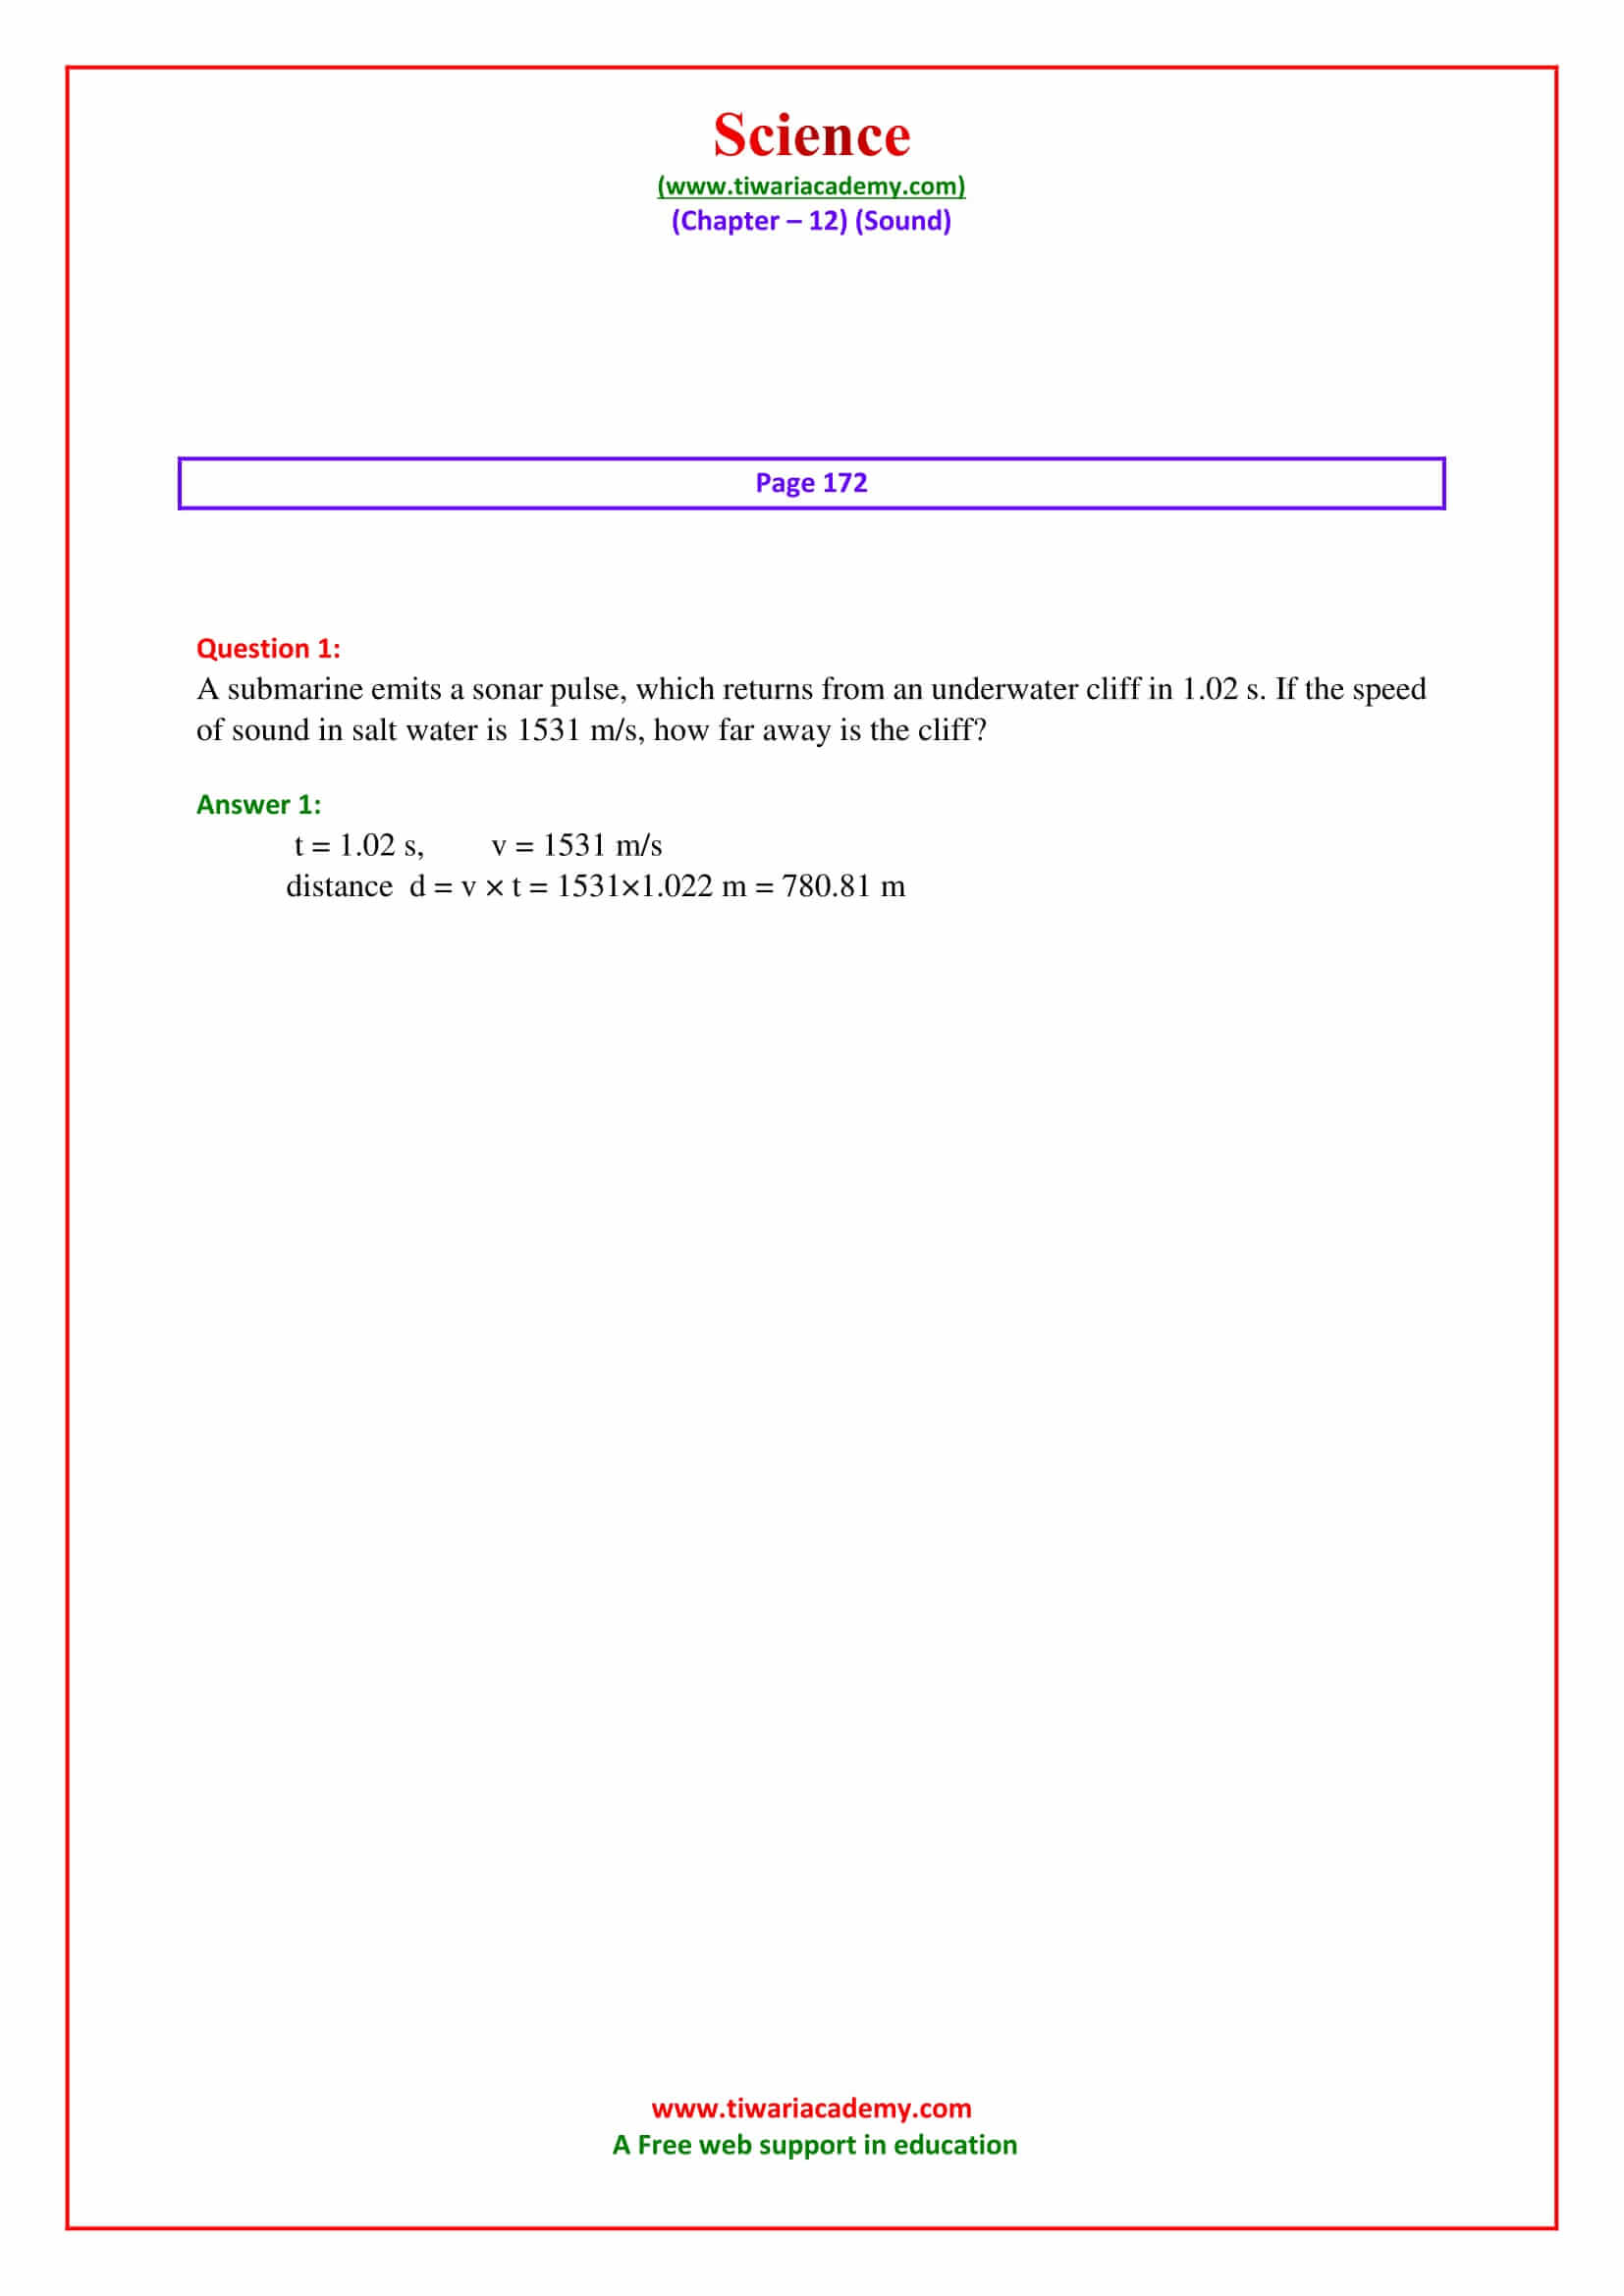 NCERT Solutions for Class 9 Science Chapter 12 Sound page 172